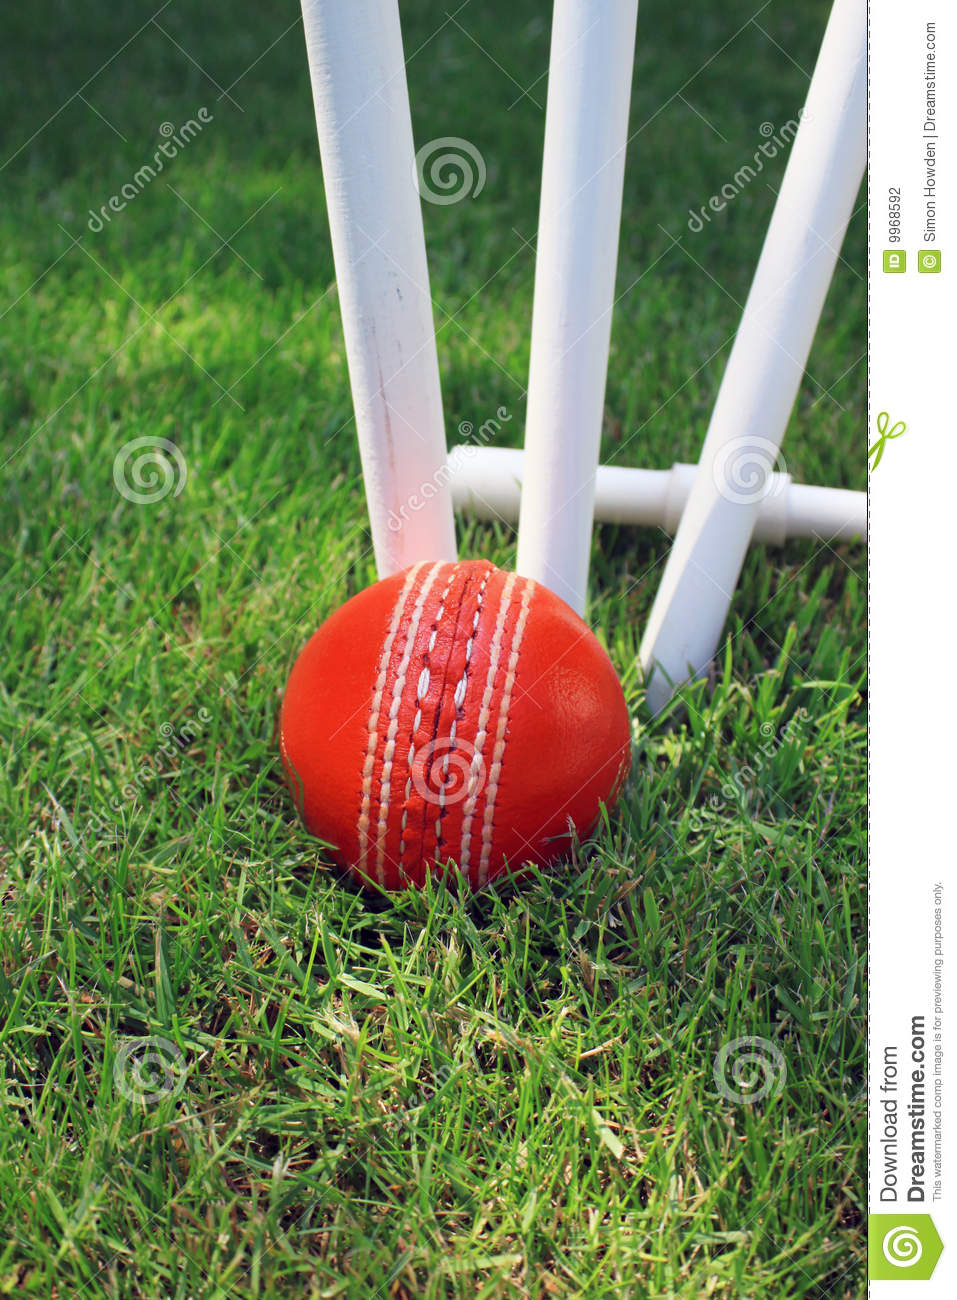 Red Leather Cricket Ball Lying In Green Grass At The Base Of Three